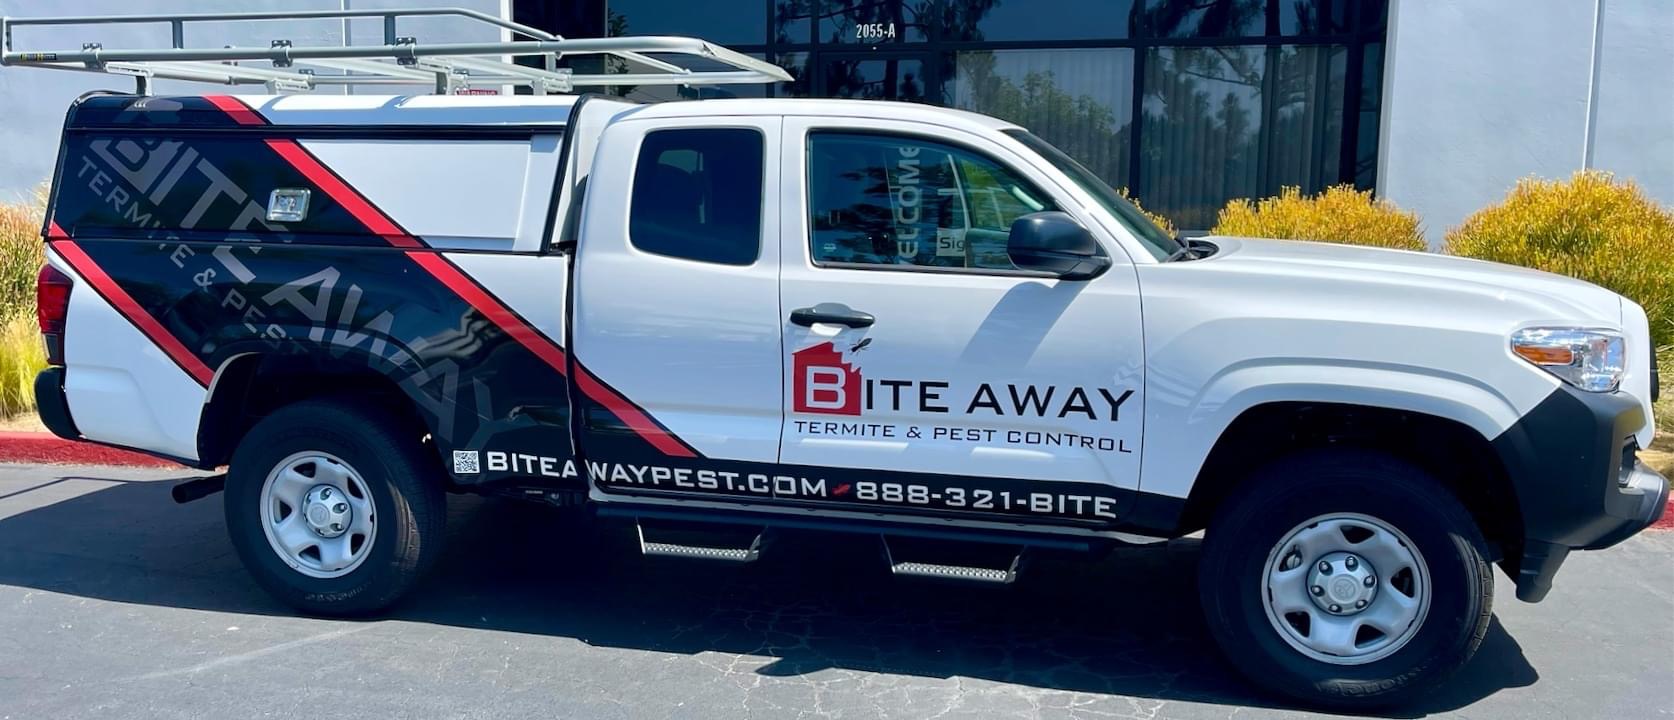 Bite Away Termite and Pest Control truck